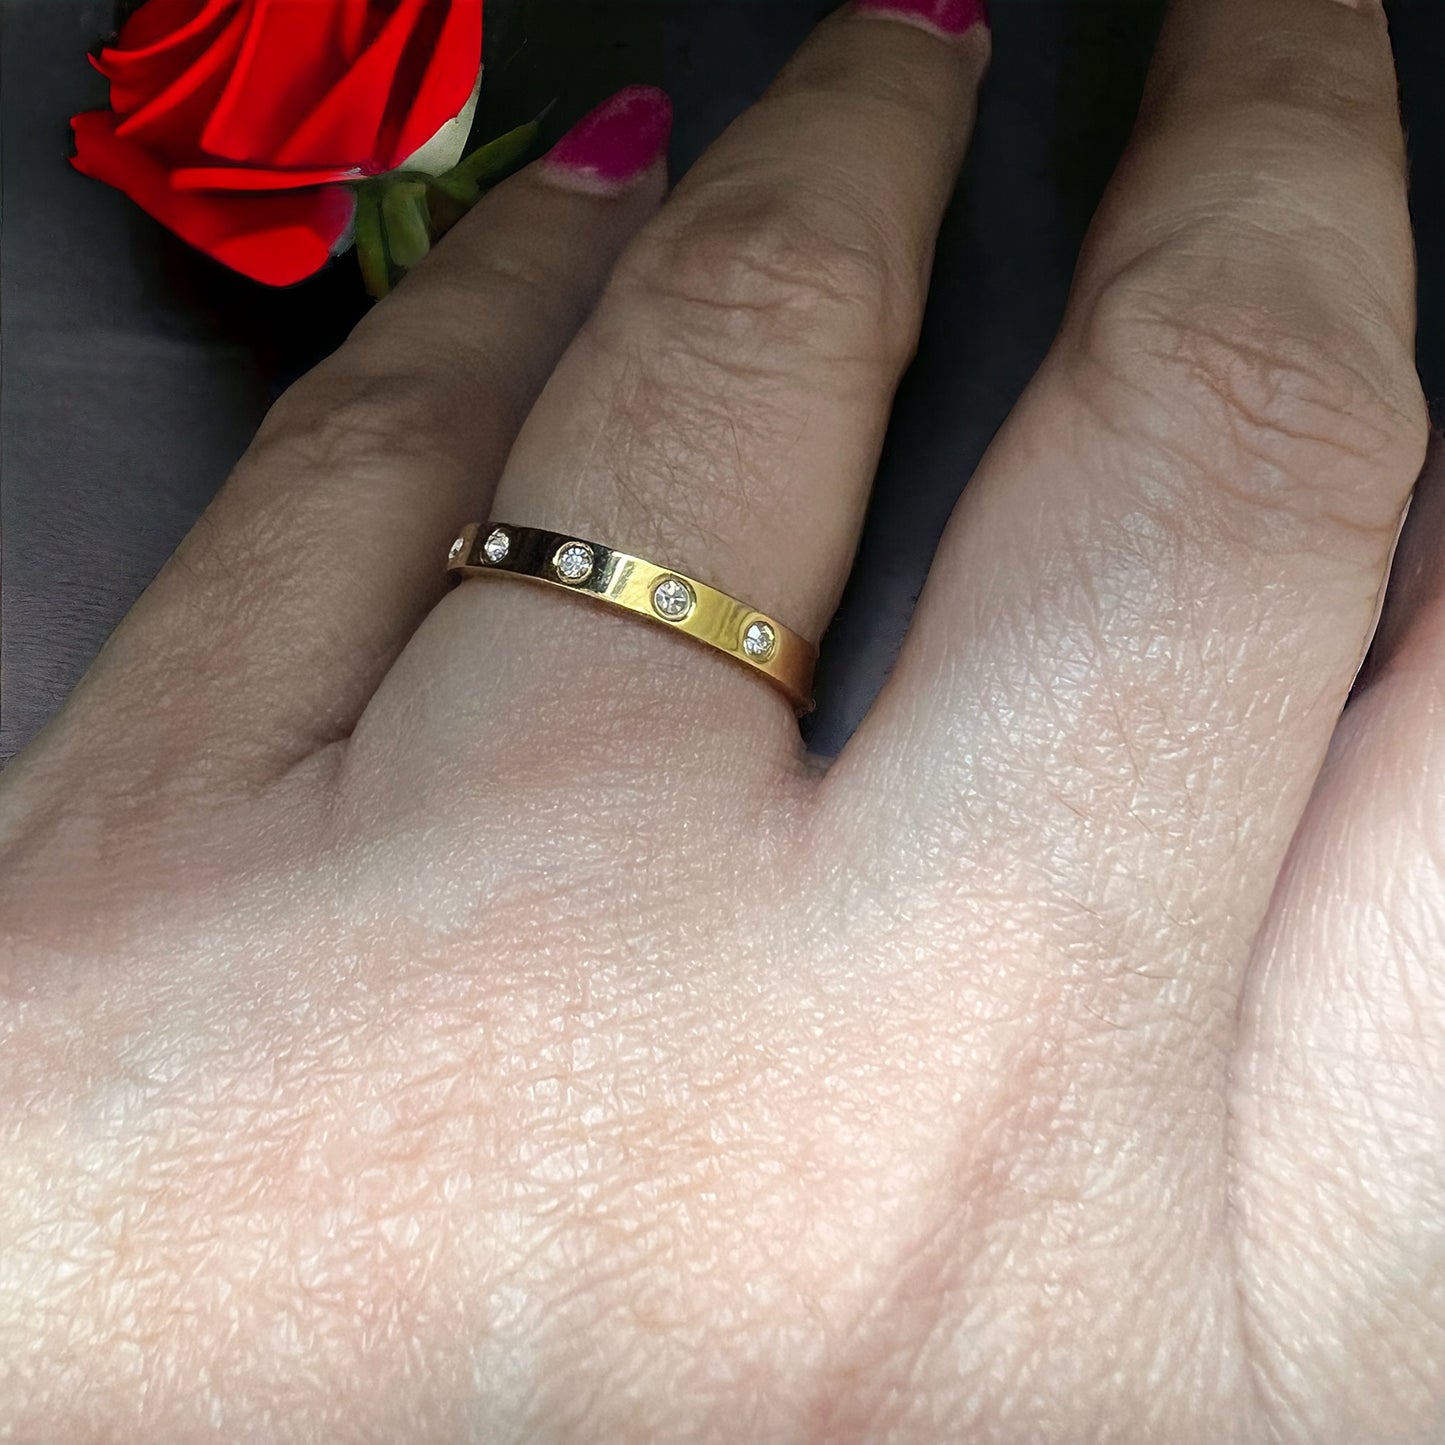 Plain Band Ring With 5 Stones In A Row